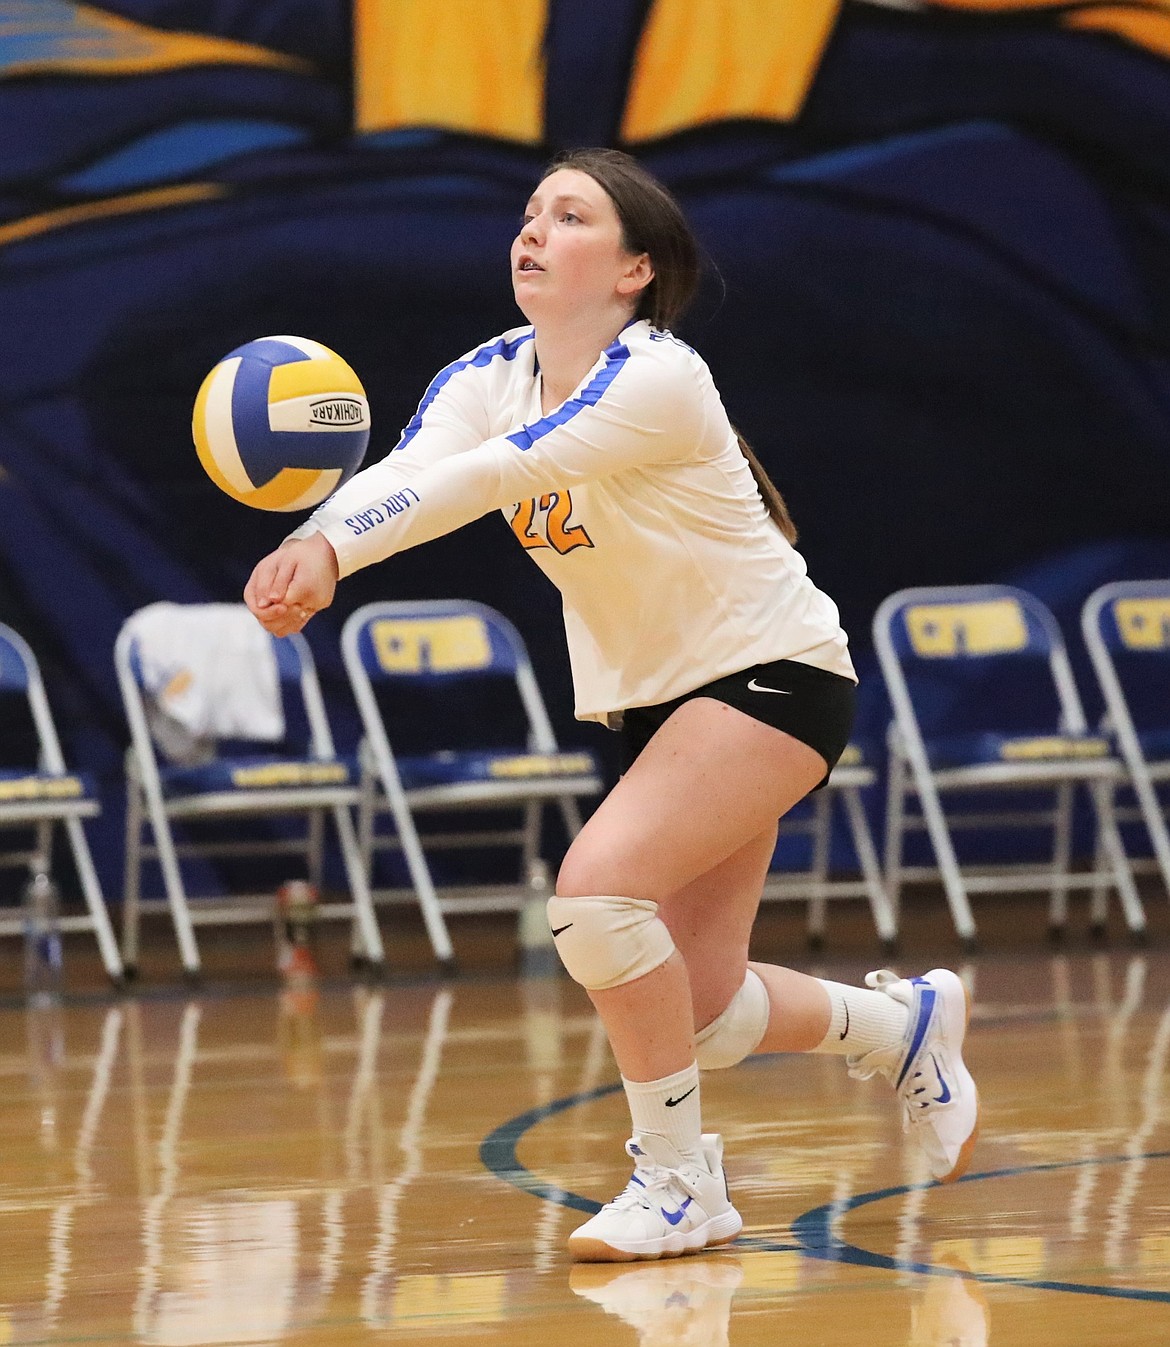 Sophomore libero Lilly Reuter gets a dig during Thursday's match.